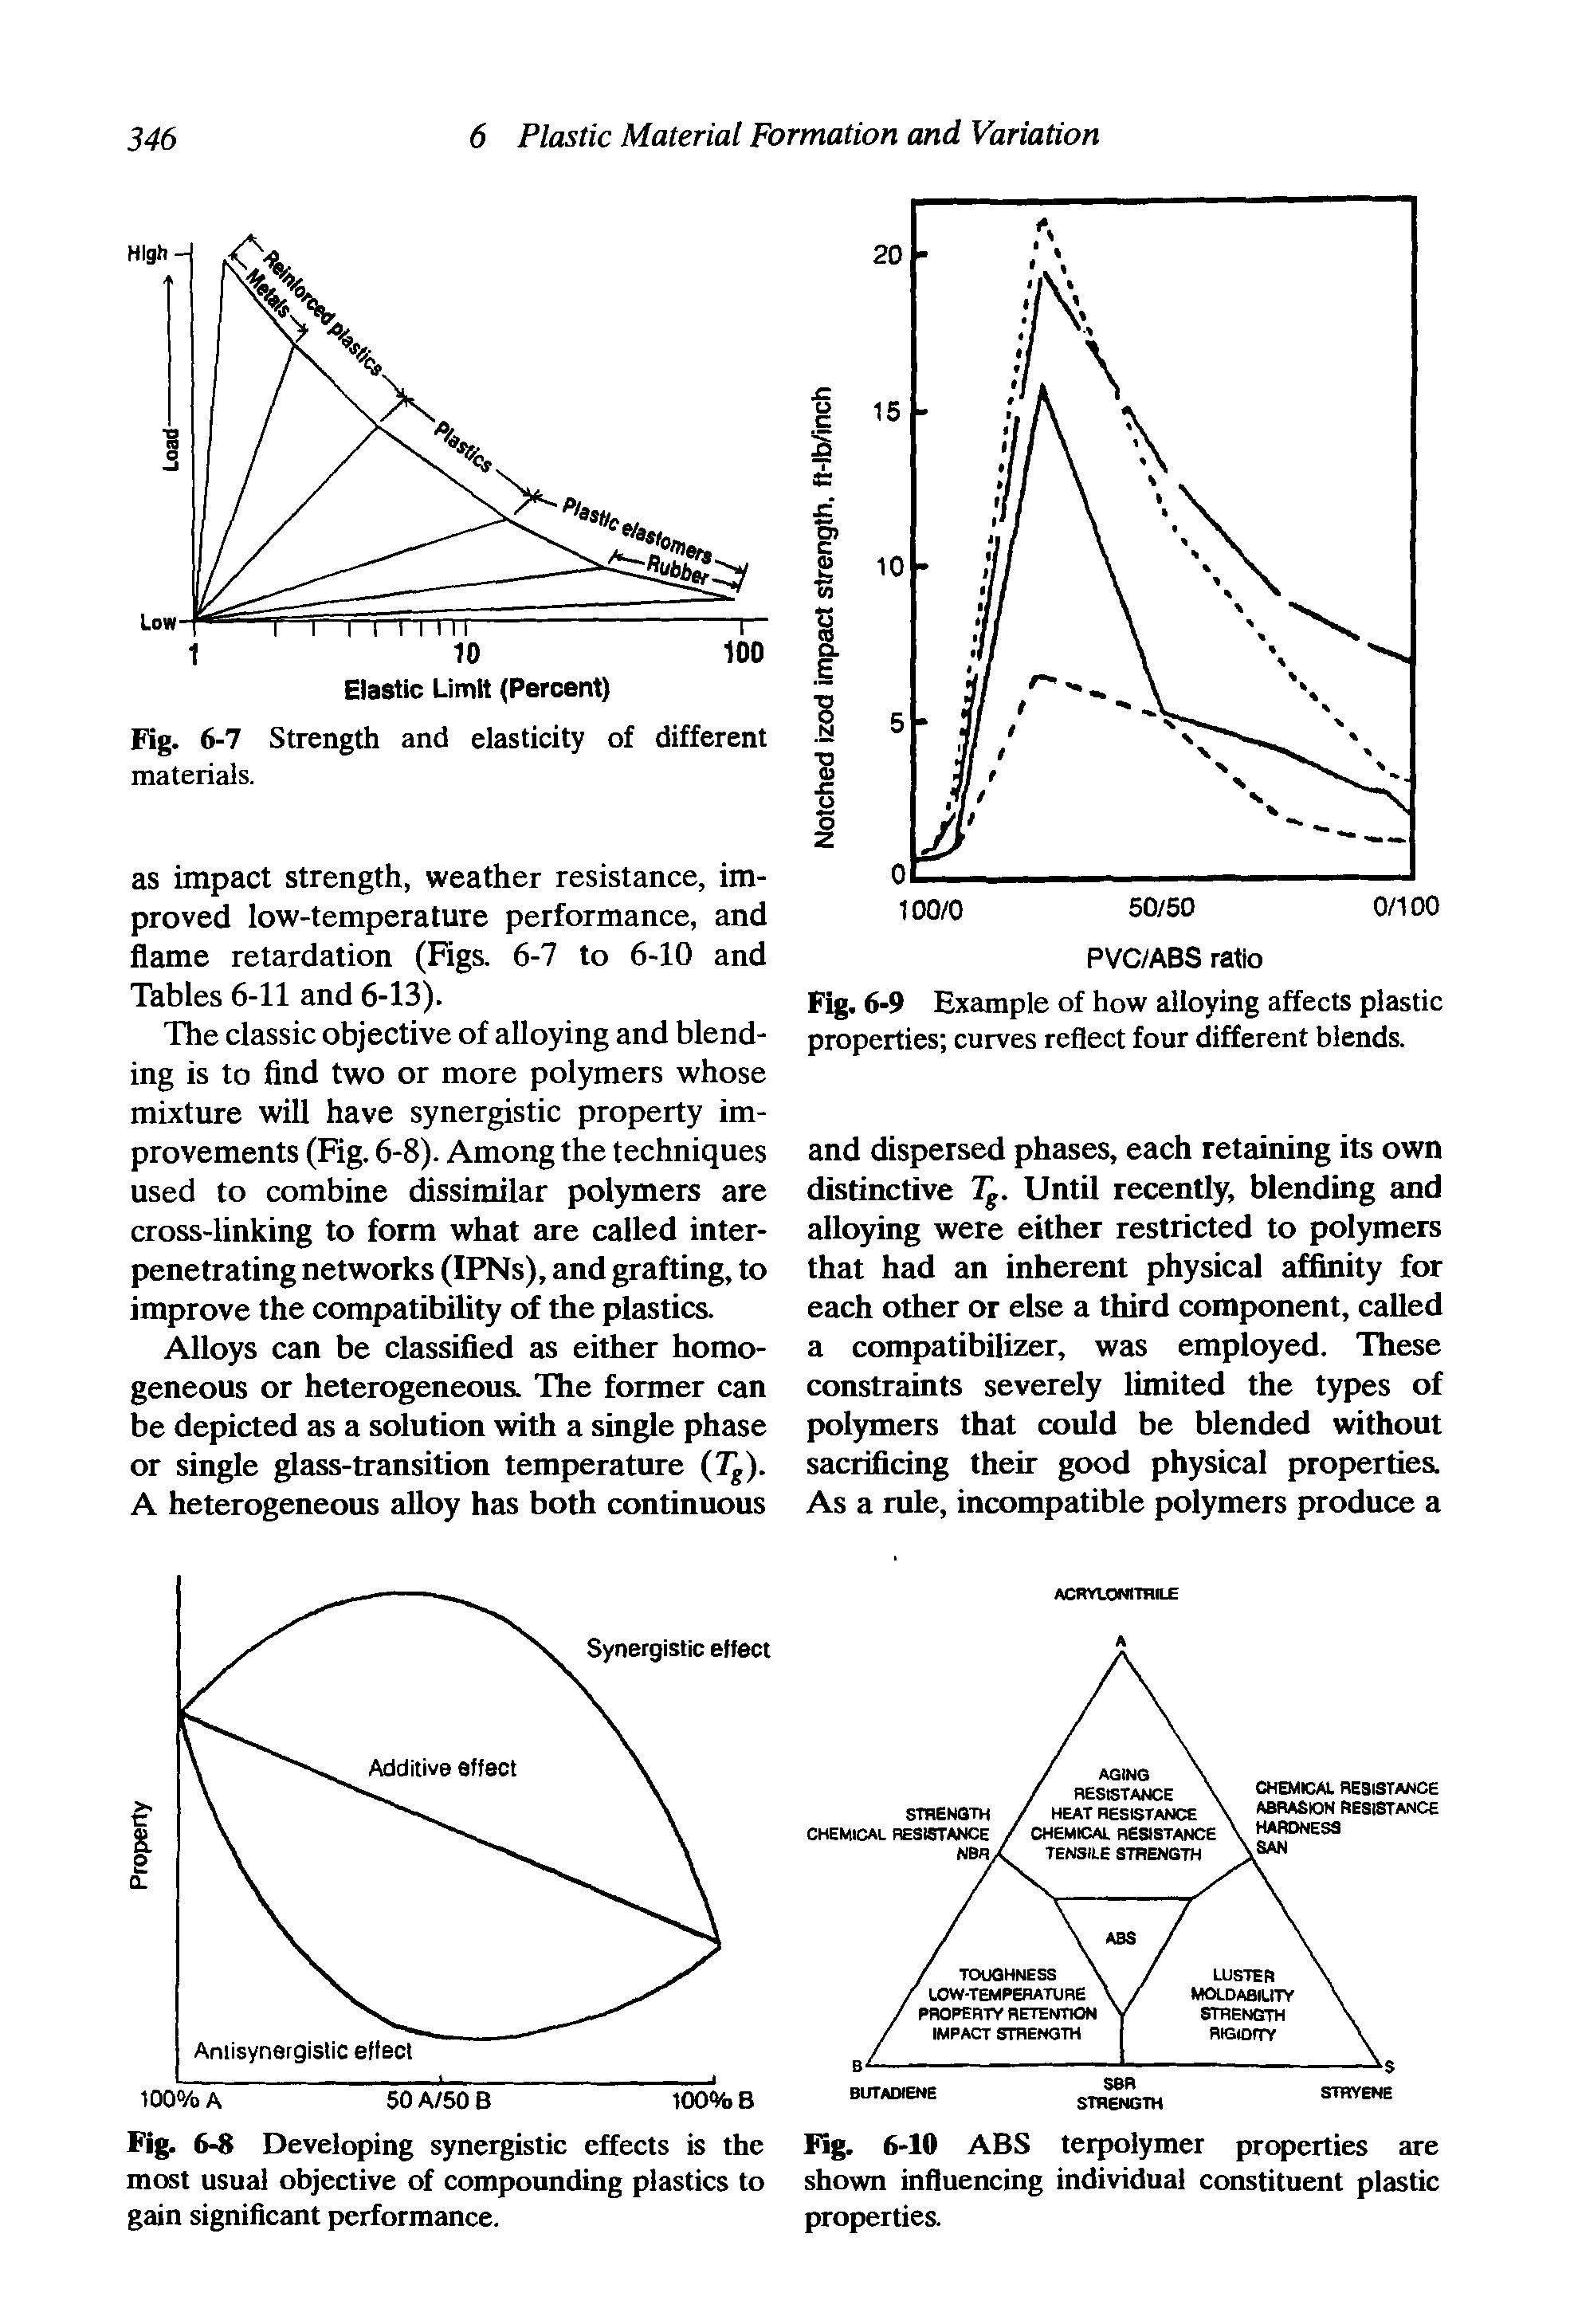 Fig. 6-9 Example of how alloying affects plastic properties curves reflect four different blends.